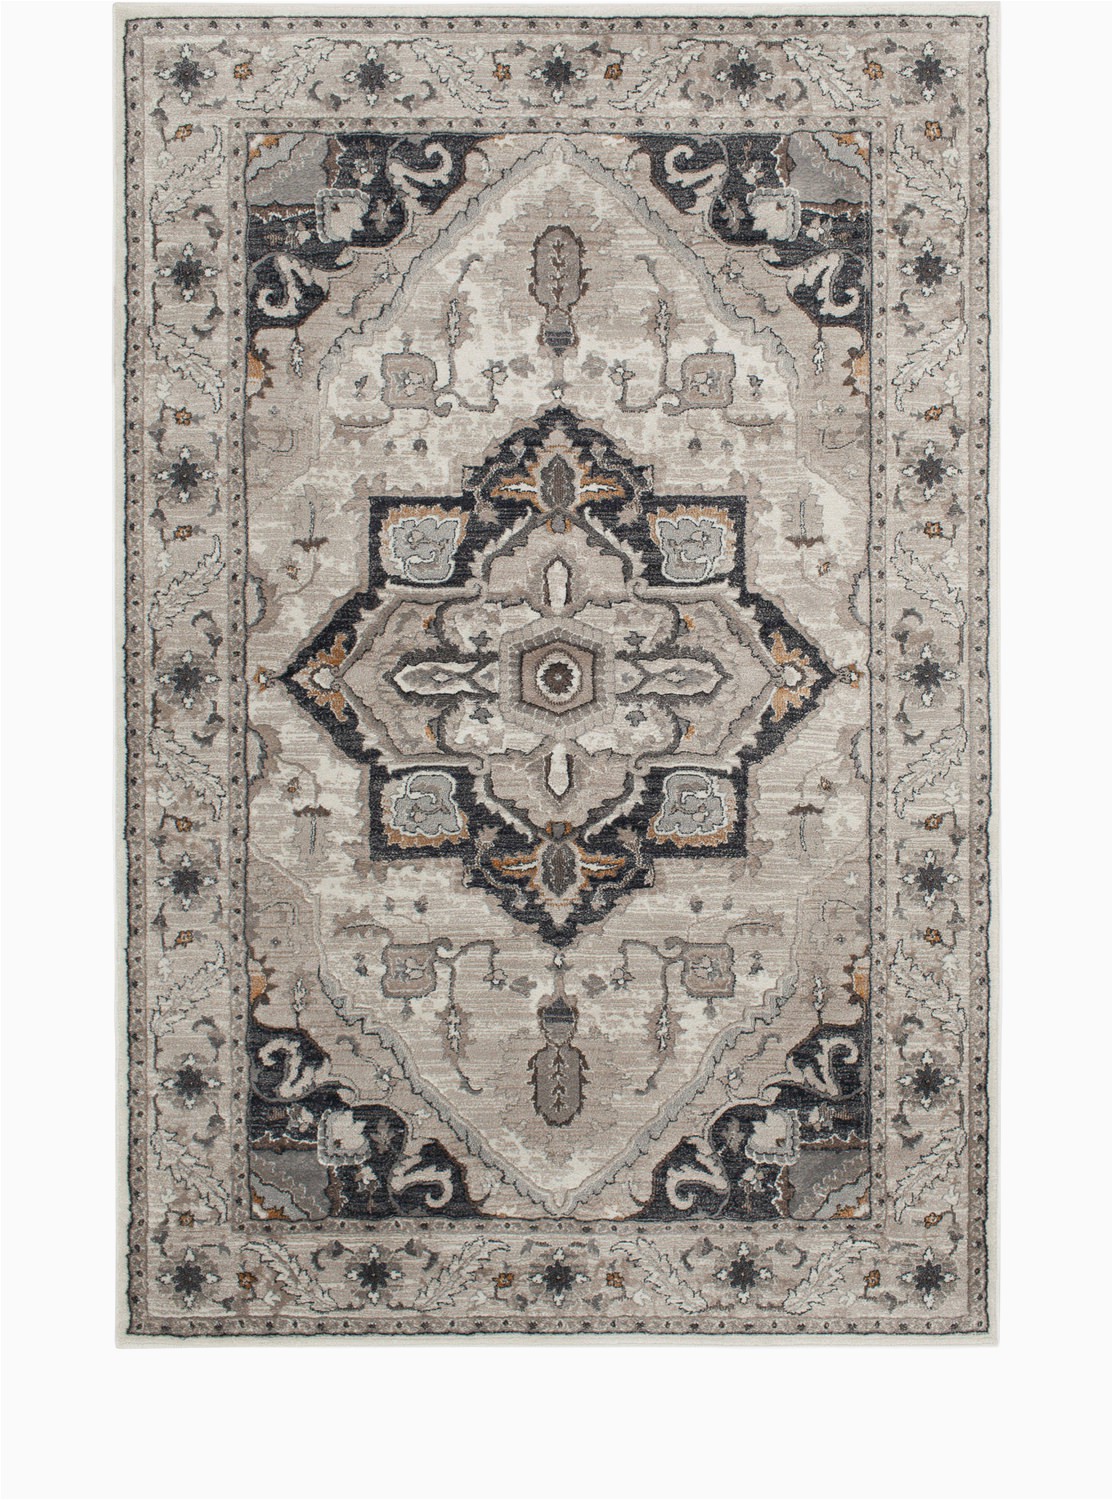 6 by 7 area Rug Adore Milla Whitecap Cement area Rug